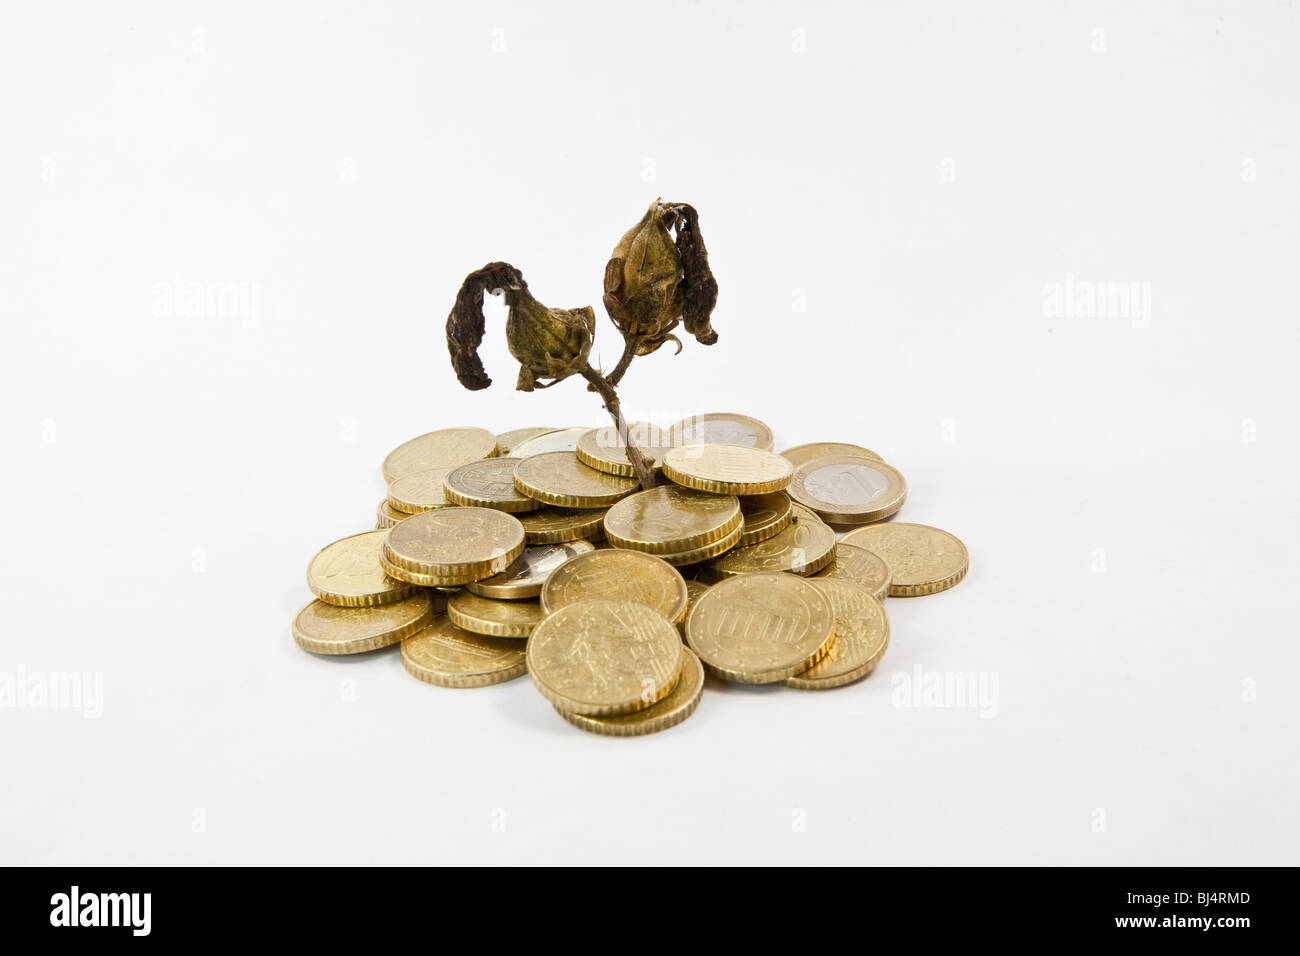 Withered plant, coins, symbolic image for failed investments, no return Stock Photo